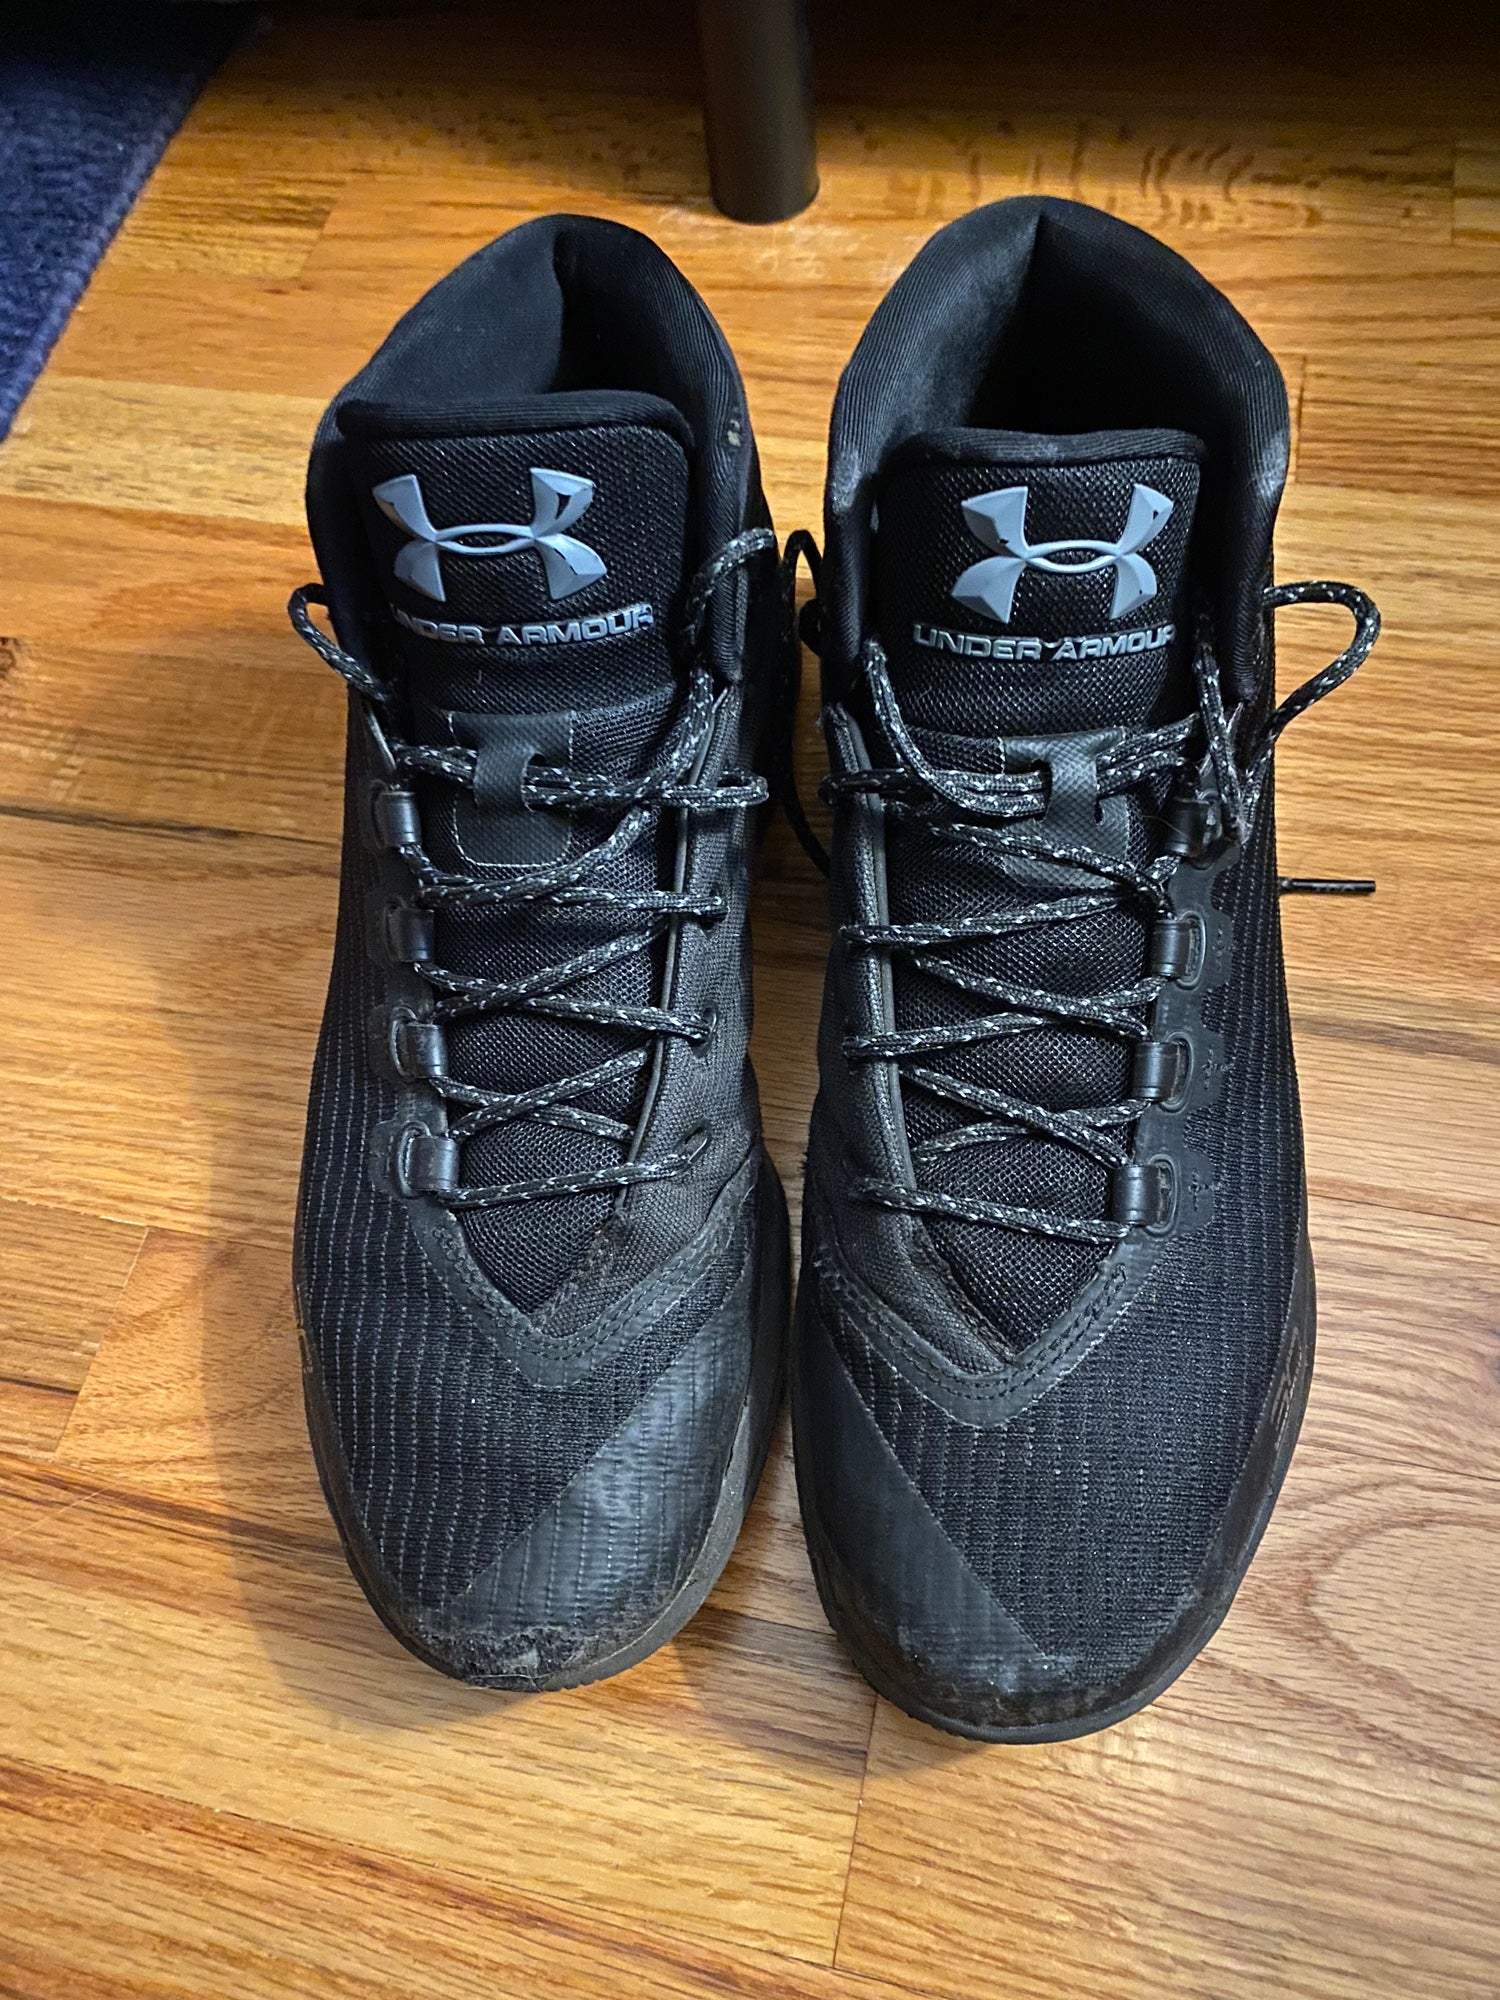 stephen curry nike shoes for sale